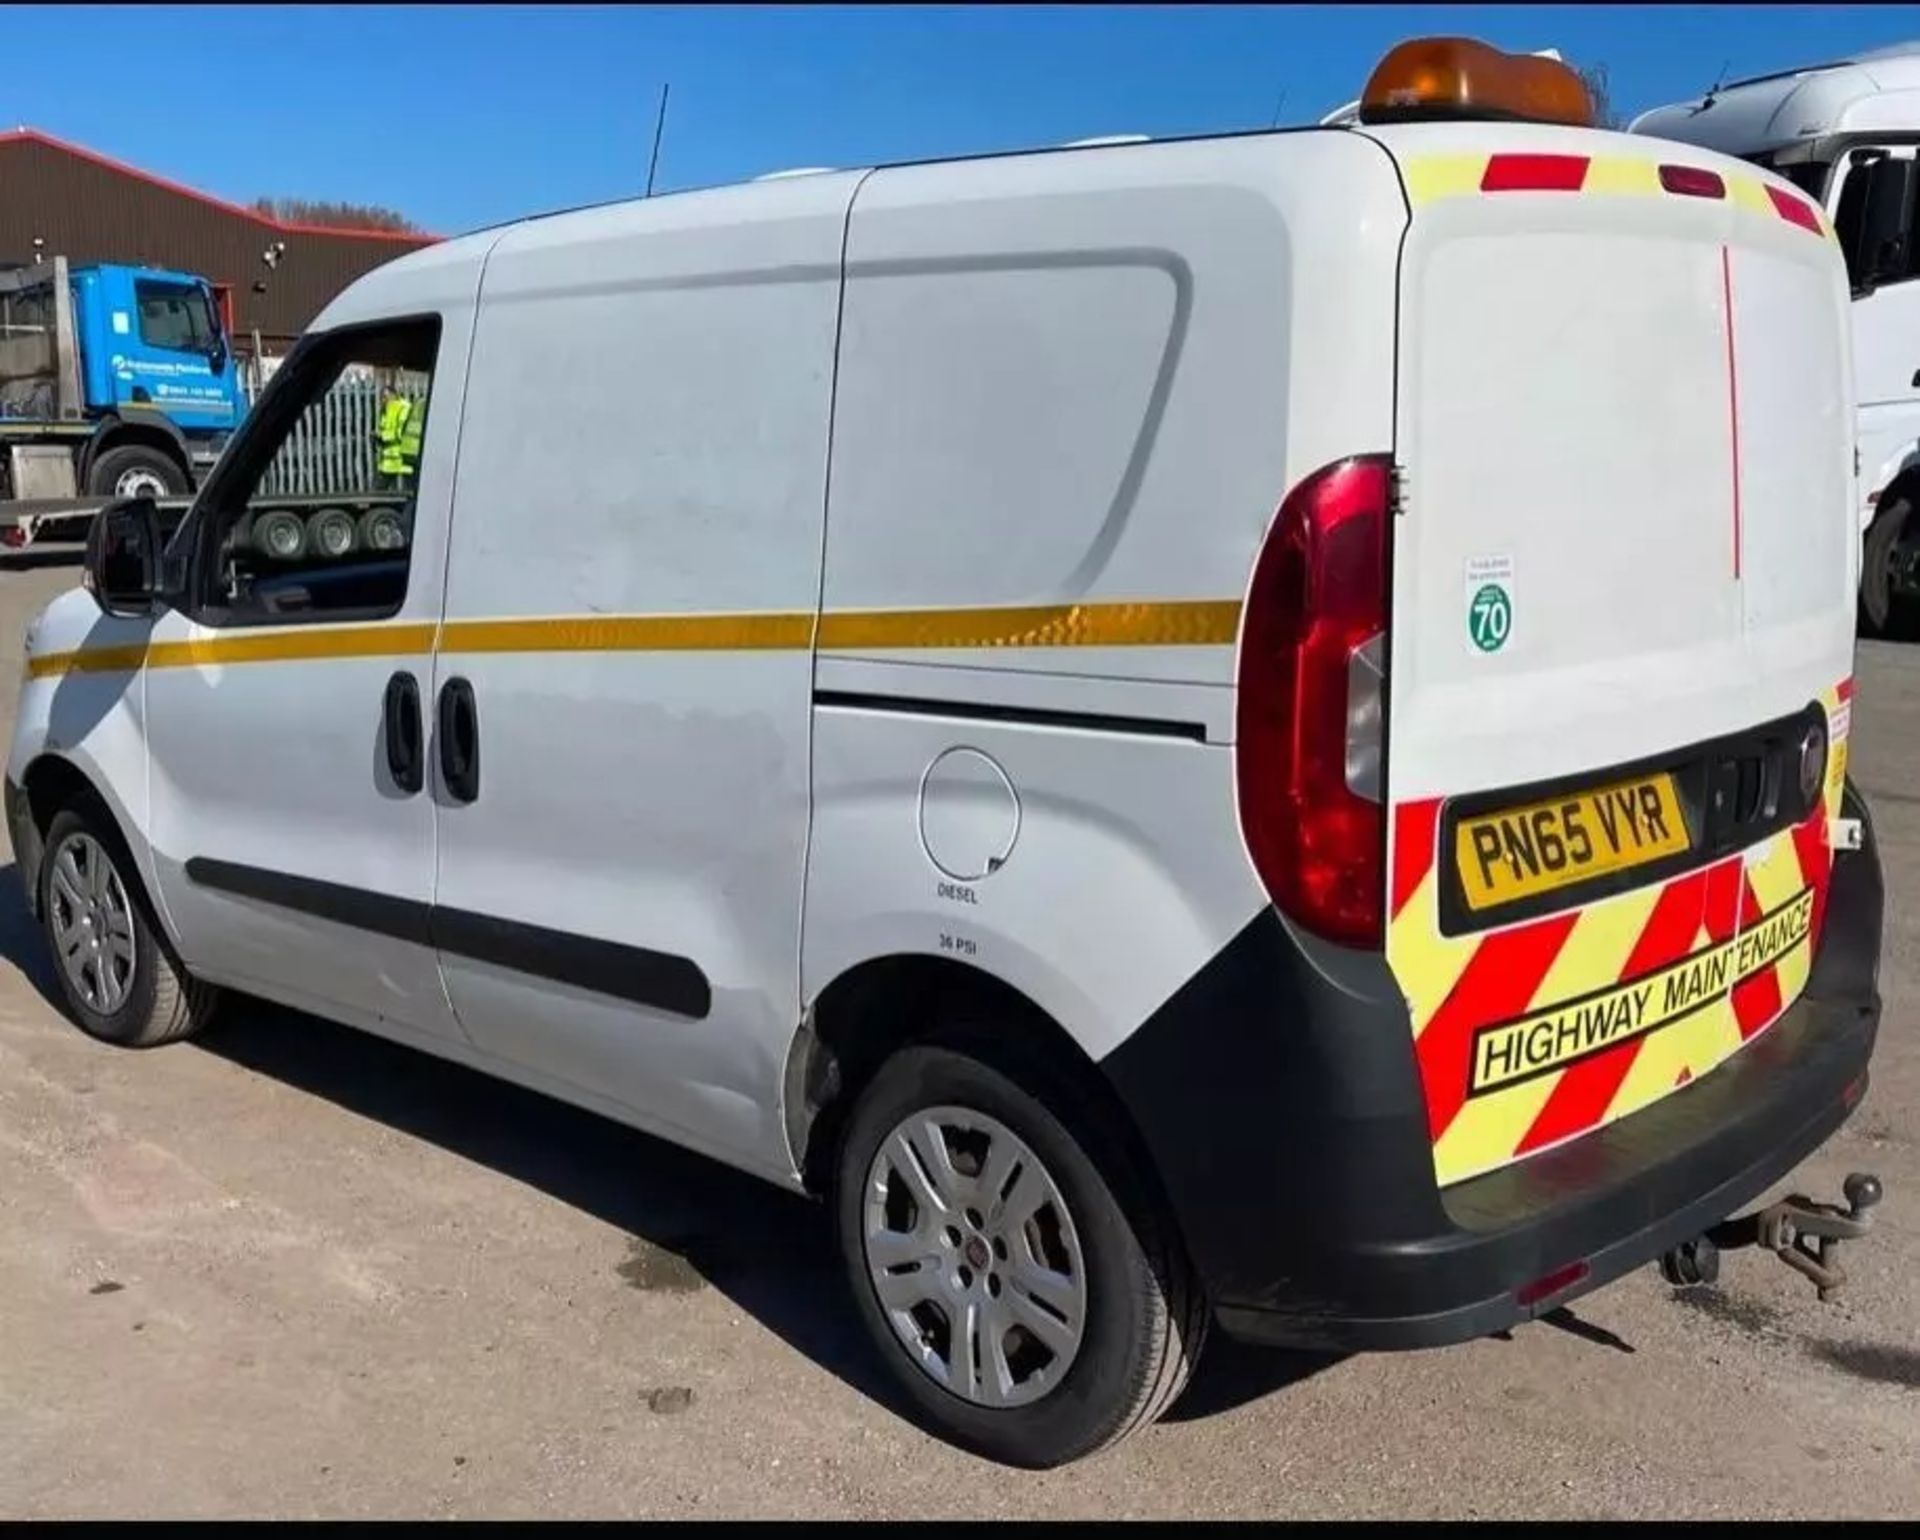 2015 FIAT DOBLO HDI PANEL VAN - RELIABLE FLEET VEHICLE, READY FOR WORK - Image 2 of 13